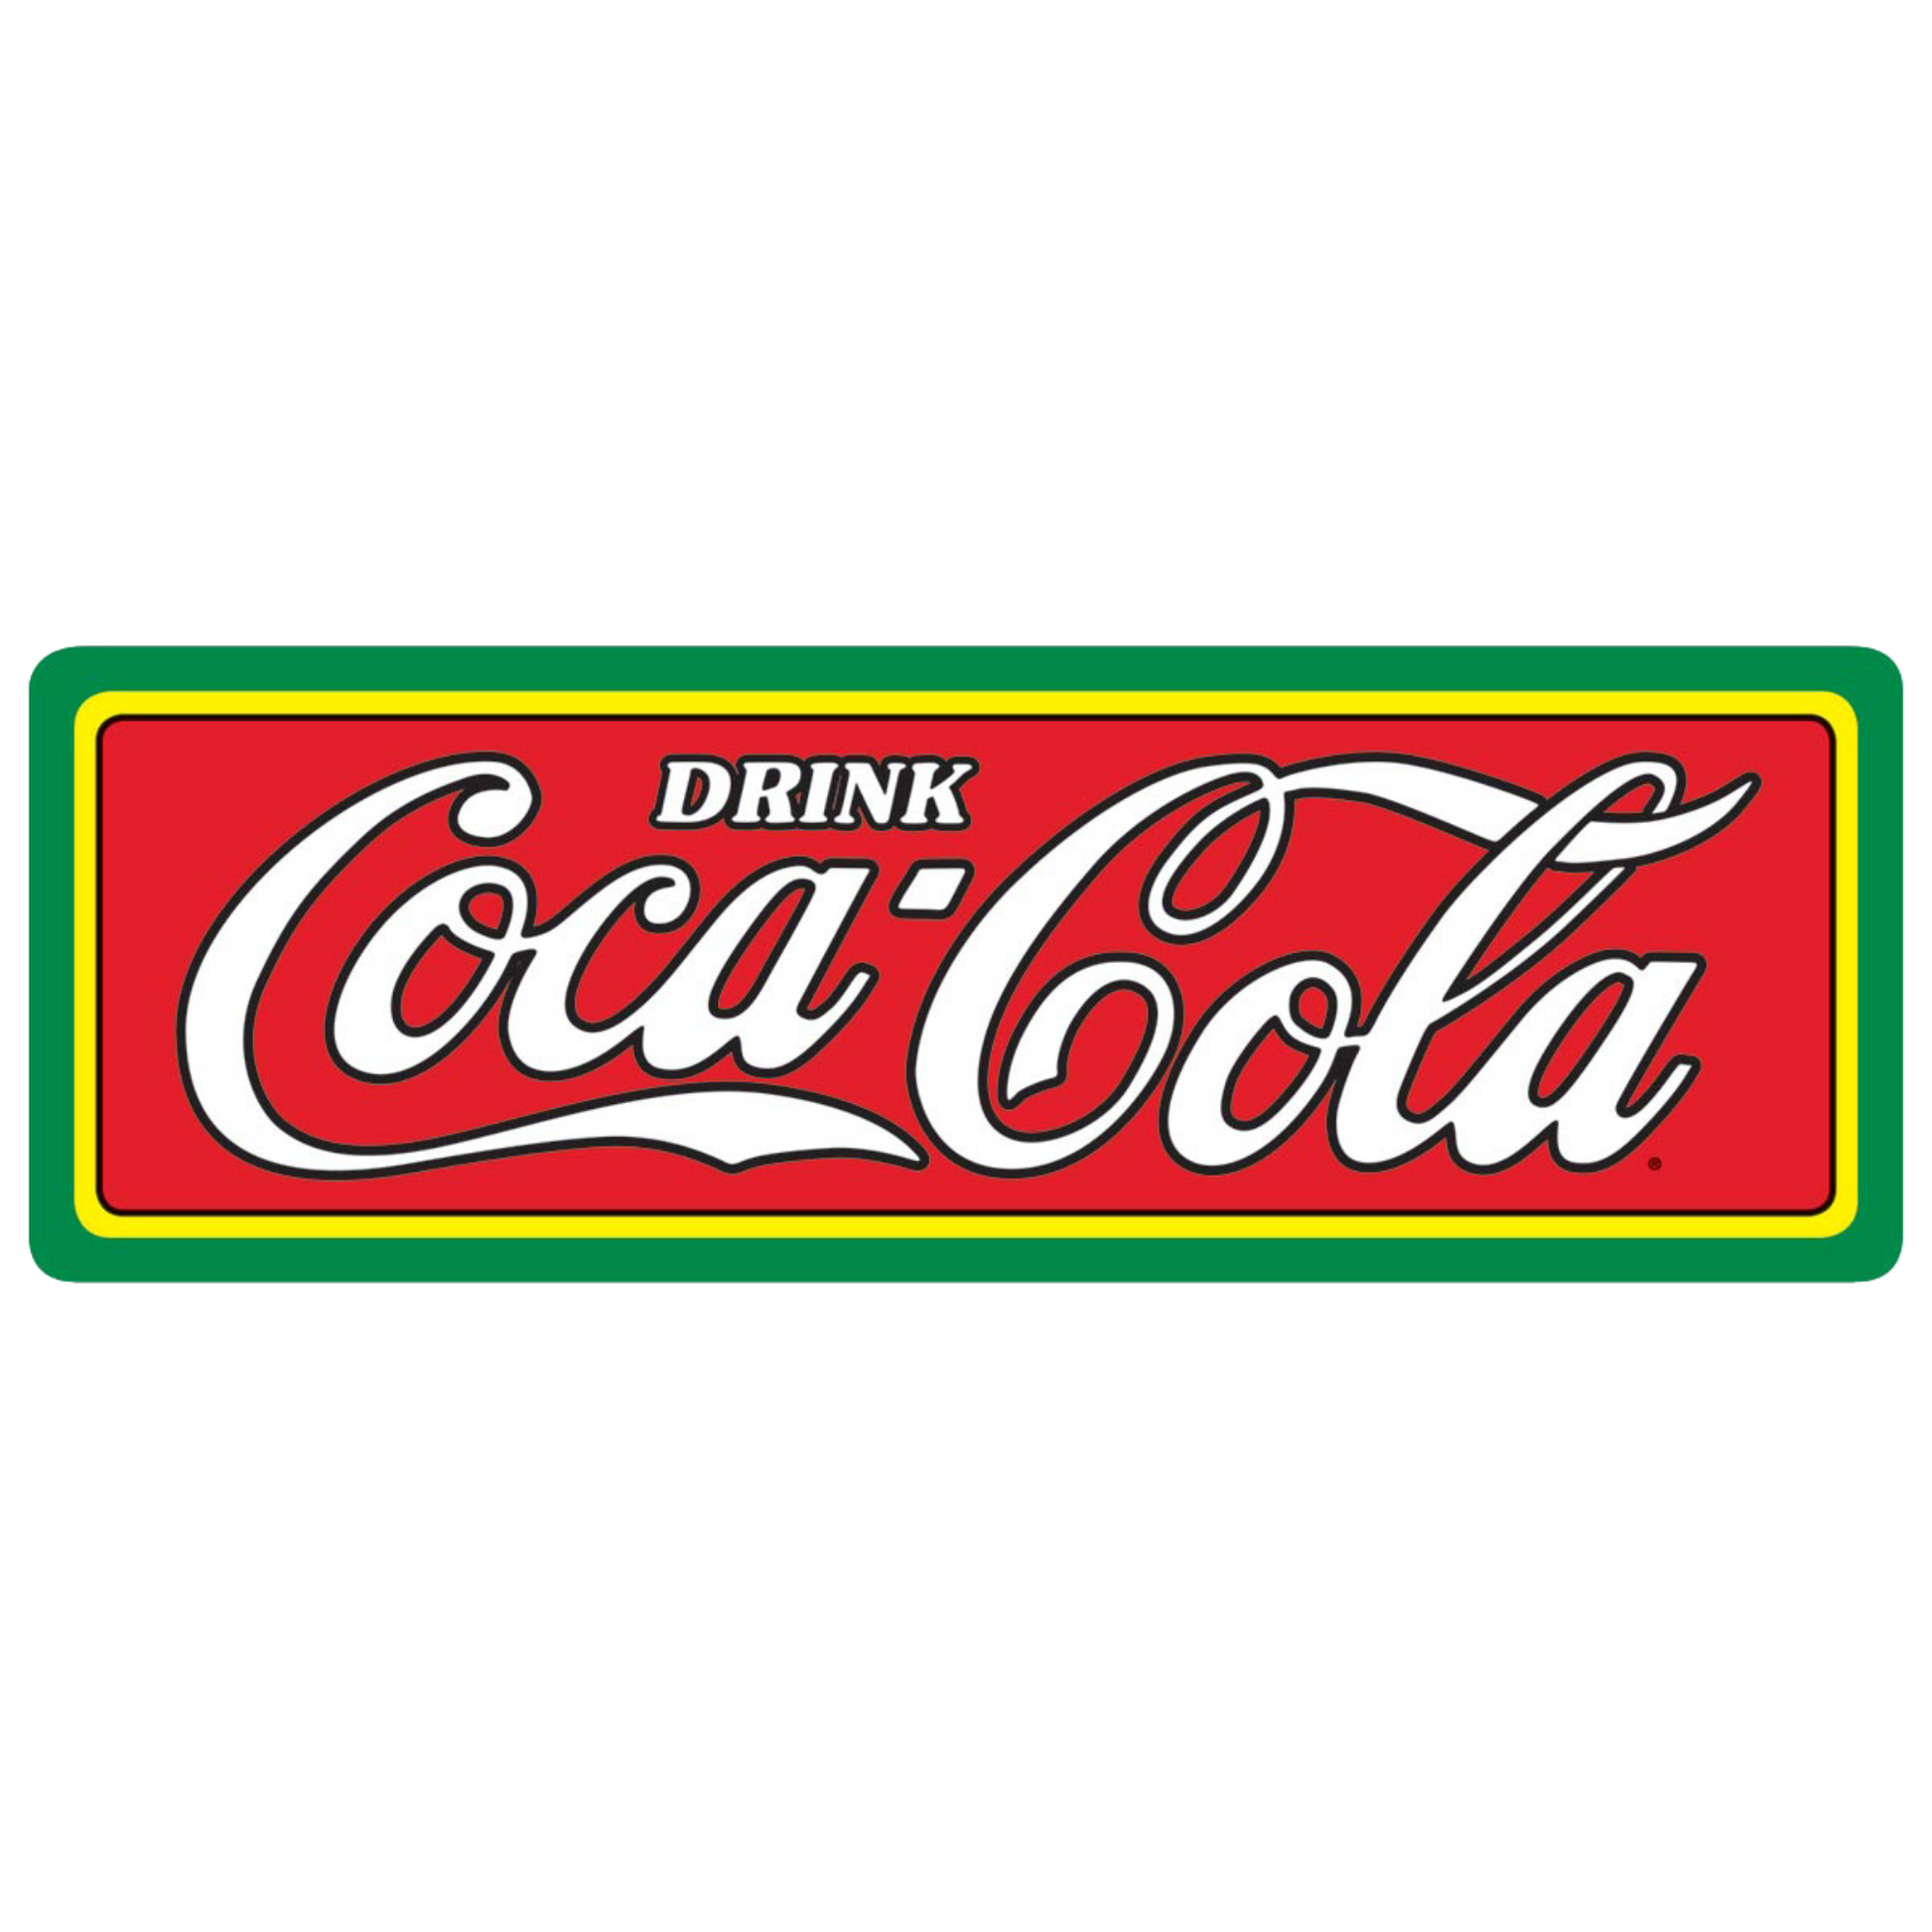 Rectangular red tin sign with green borders featuring "Drink Coca-Cola" in stylized white lettering.